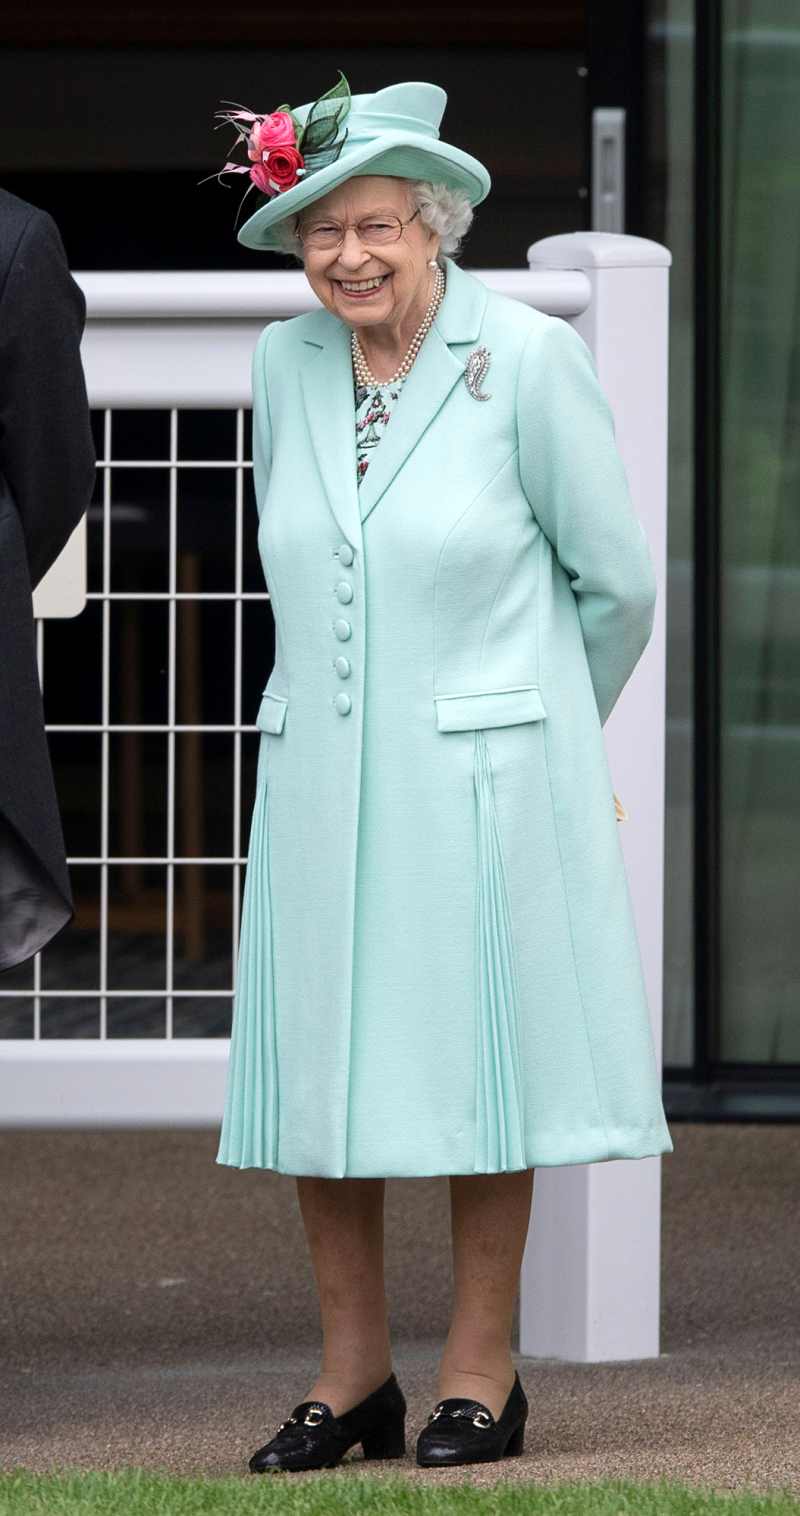 Queen Elizabeth II Attends Royal Ascot After Missing It for the First Time in 68 Years